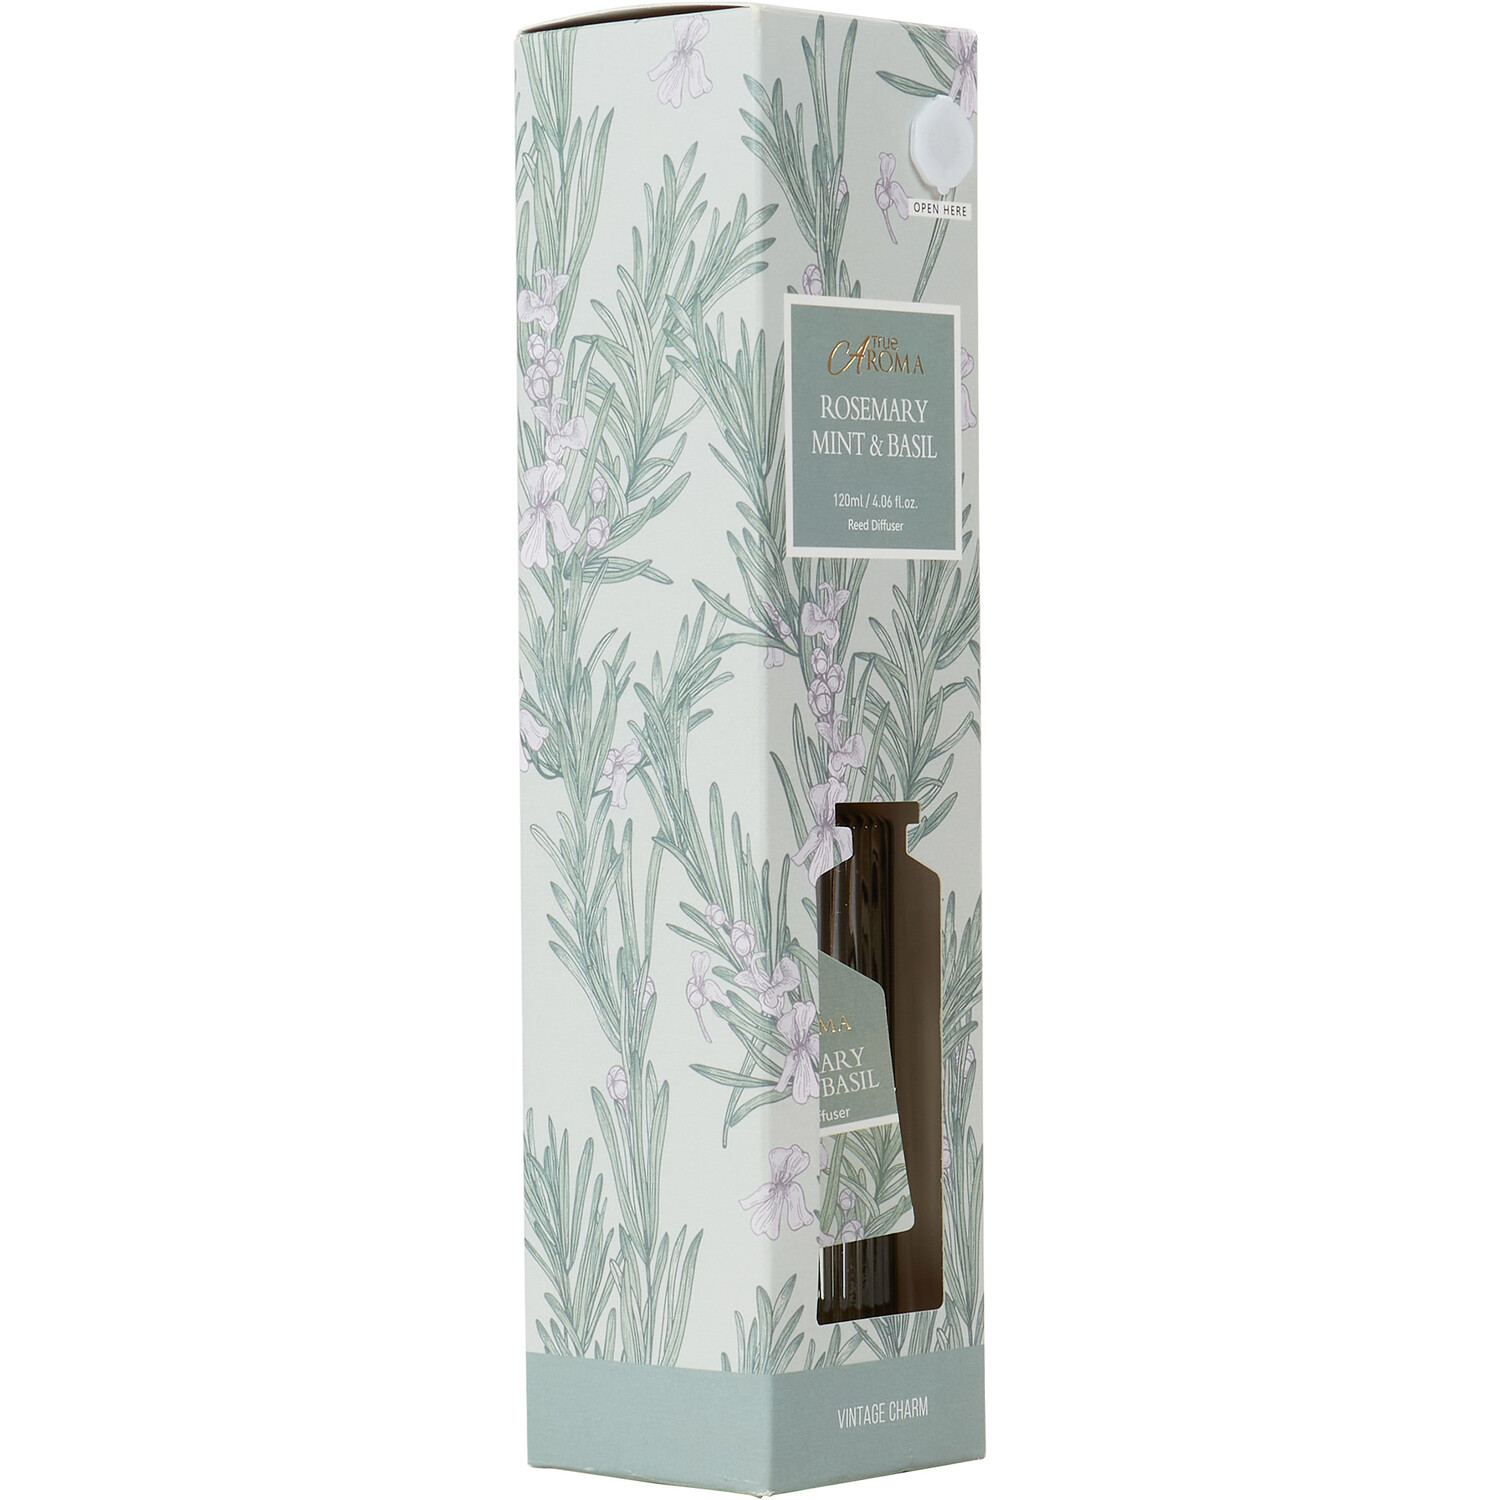 Rosemary Mint & Basil Diffuser 120ml - Clear Image 3